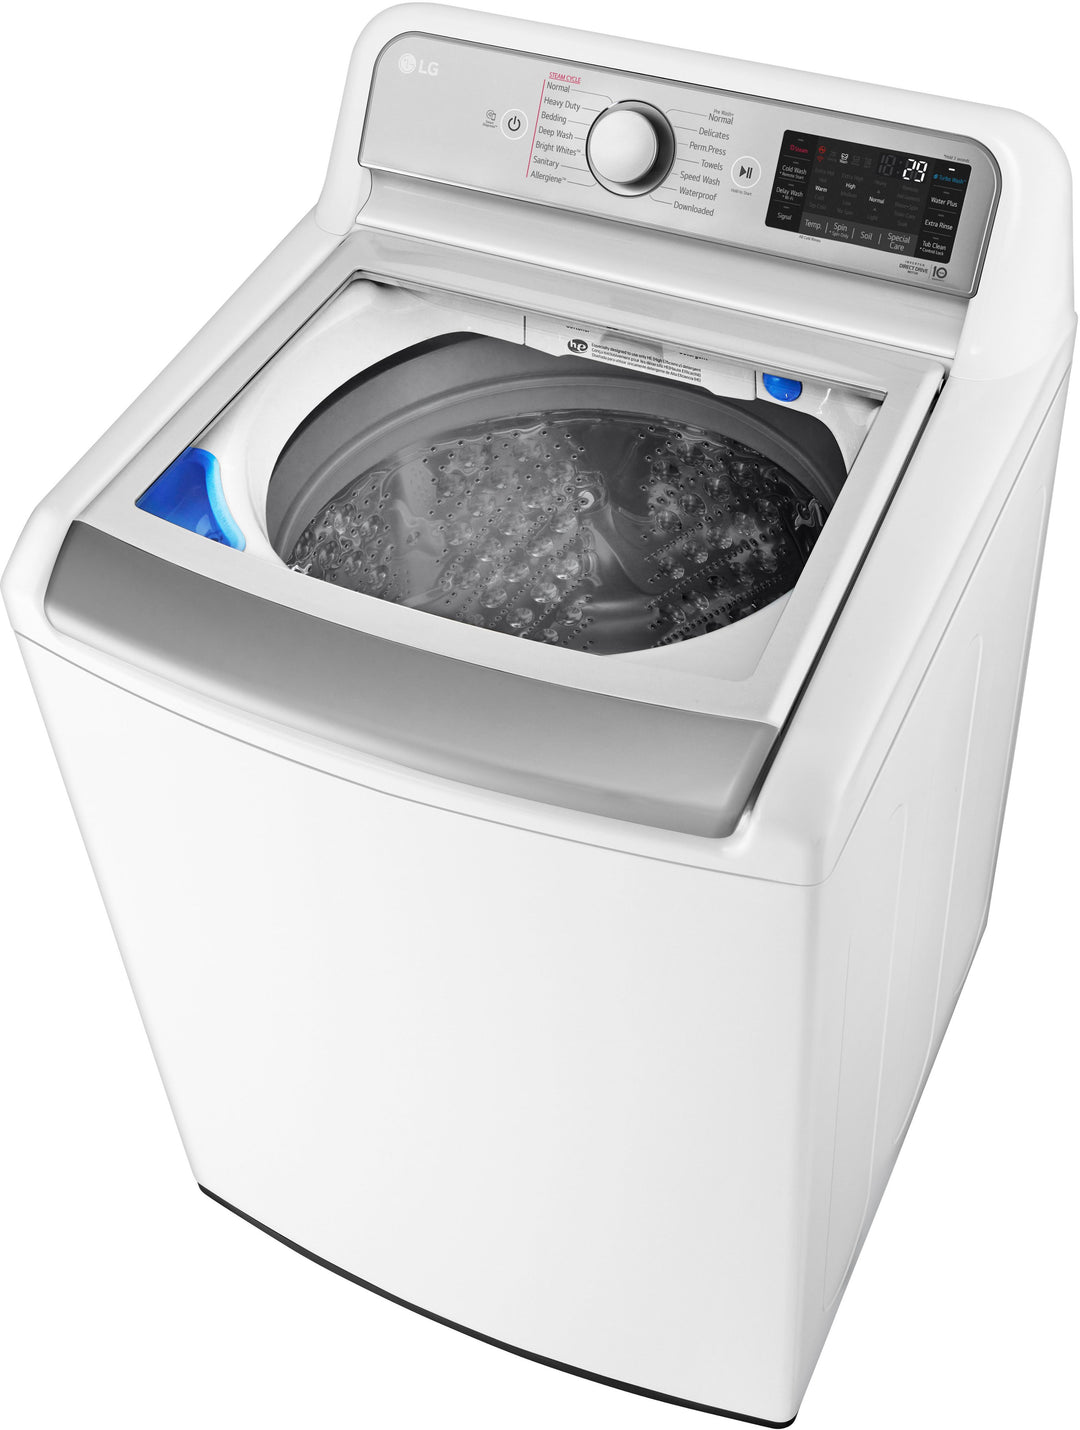 LG - 5.5 Cu. Ft. High-Efficiency Smart Top Load Washer with Steam and TurboWash3D Technology - White_2